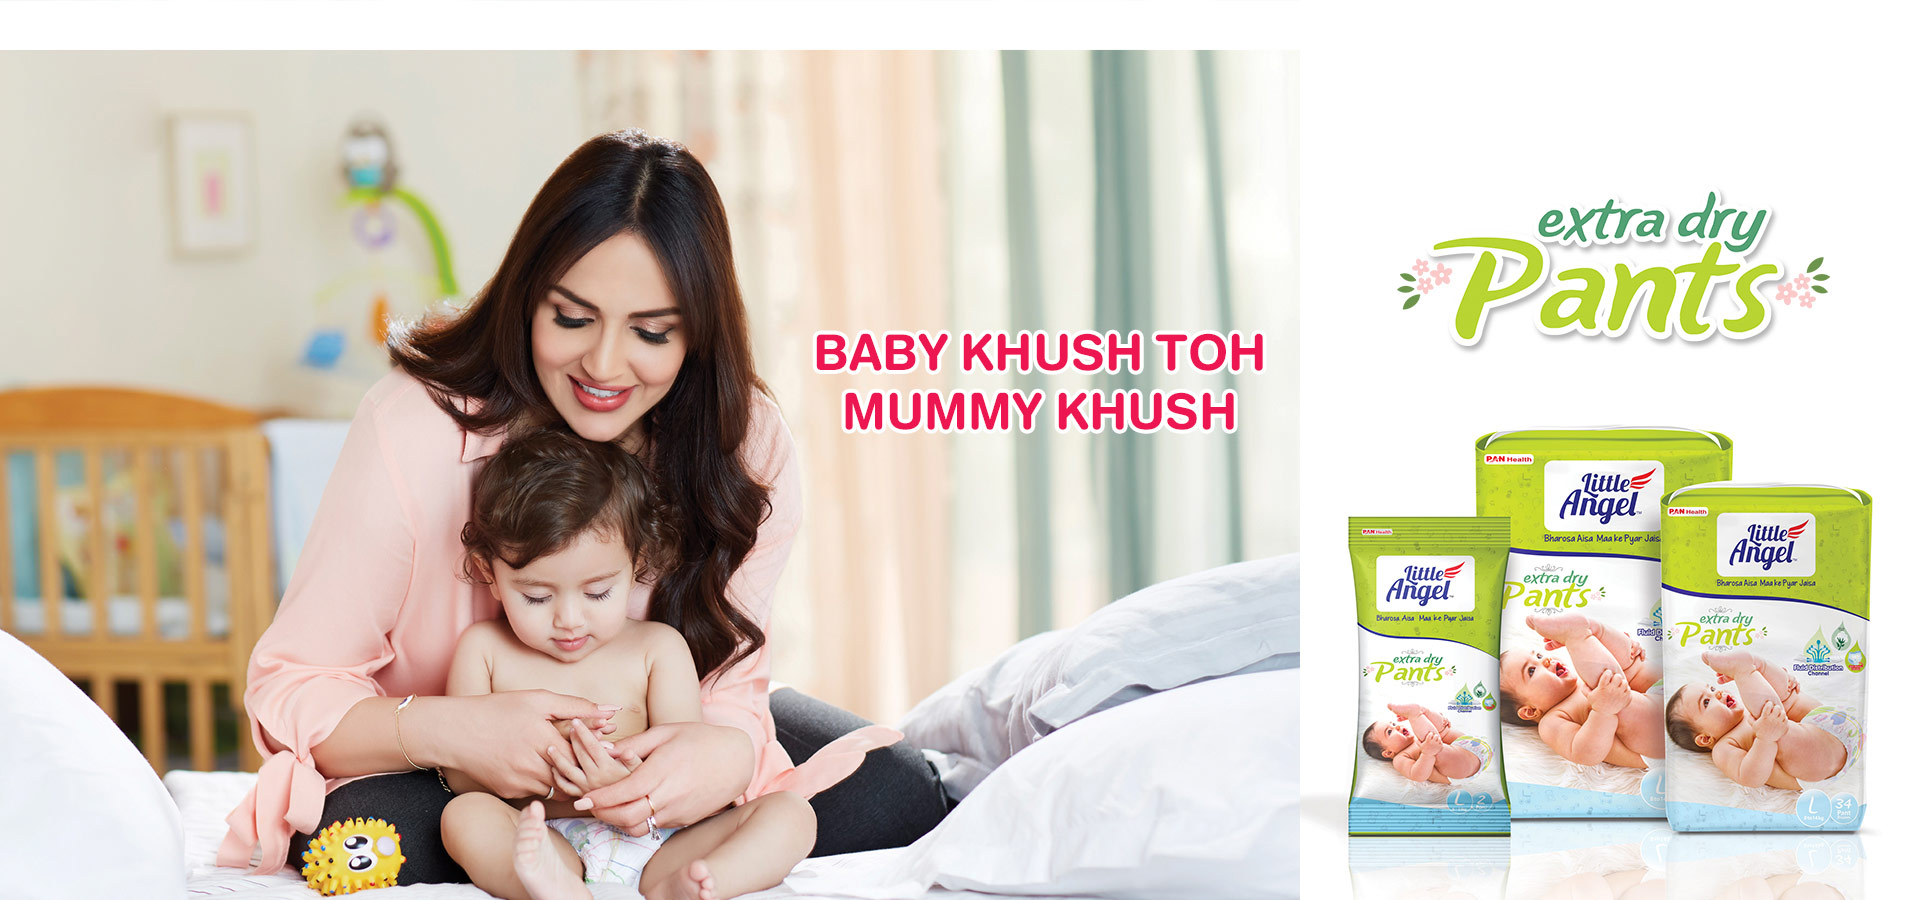 Baby Khush Toh Mummy Khush, Baby Khush Toh Mummy Khush | Baby Diapers from Little Angel